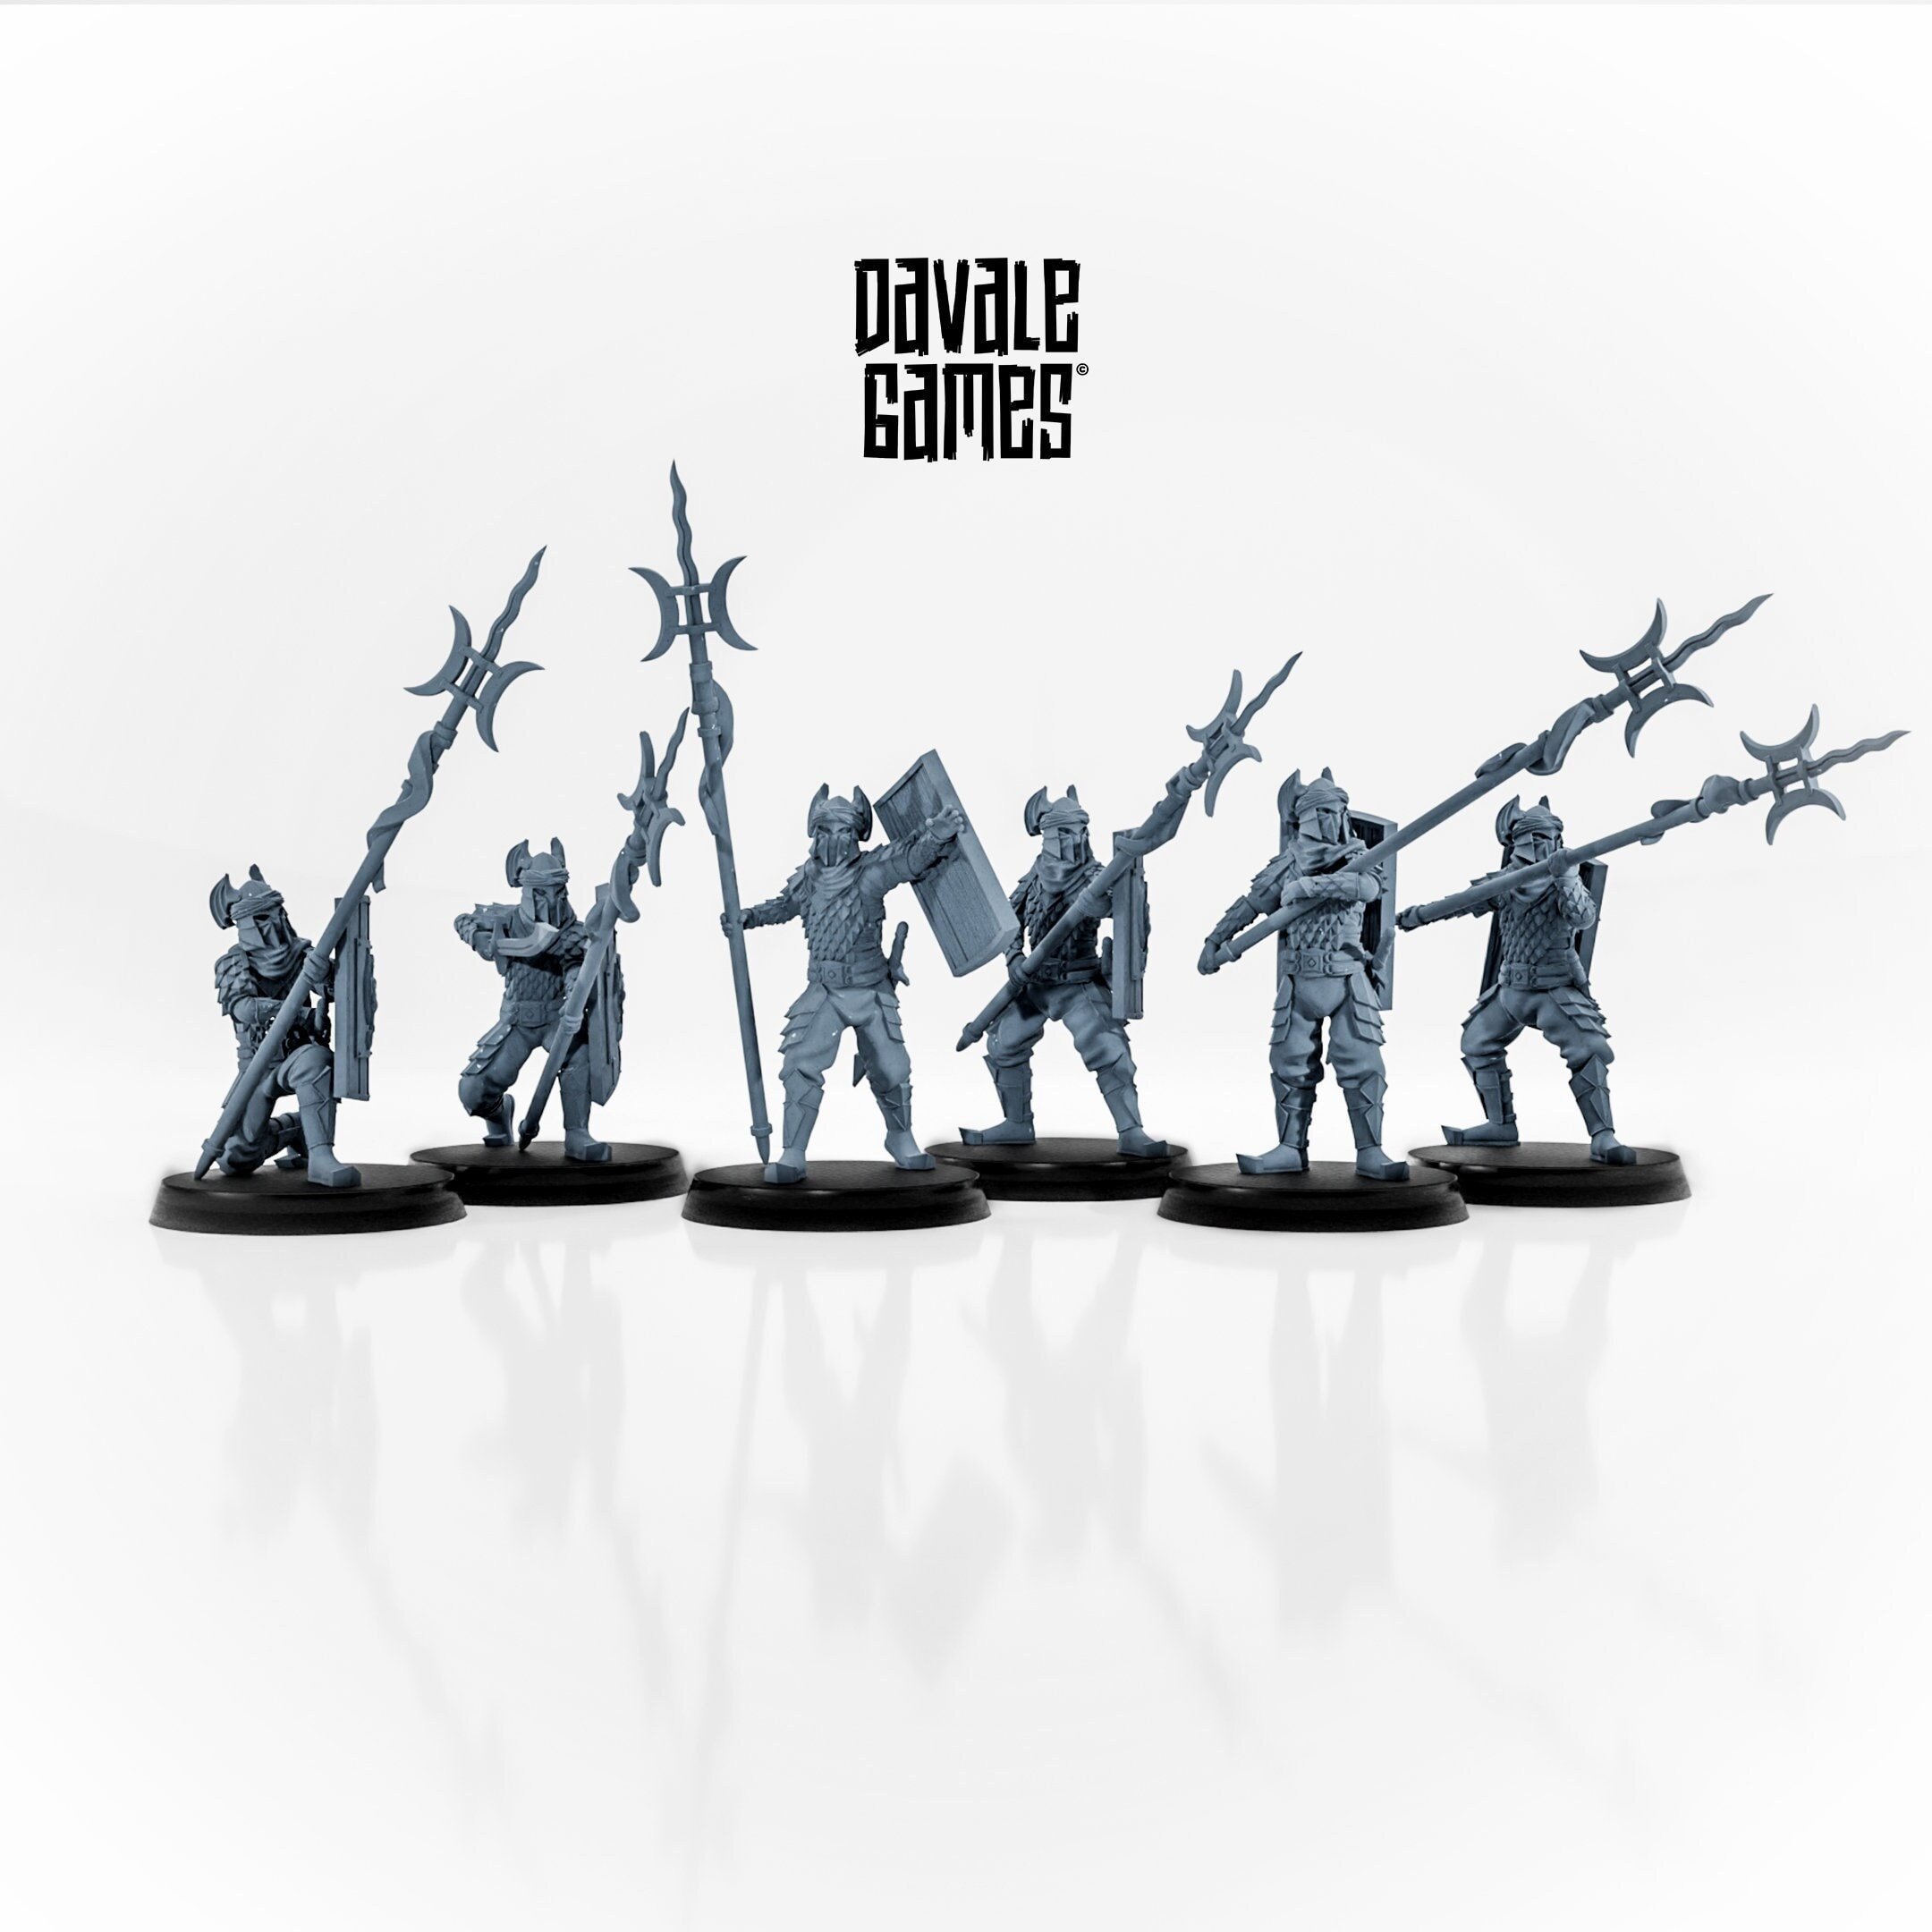 Dragon Army Warriors with Pikes wargaming miniatures designed by Davale Games 3D Printed by Forgemaster Miniatures